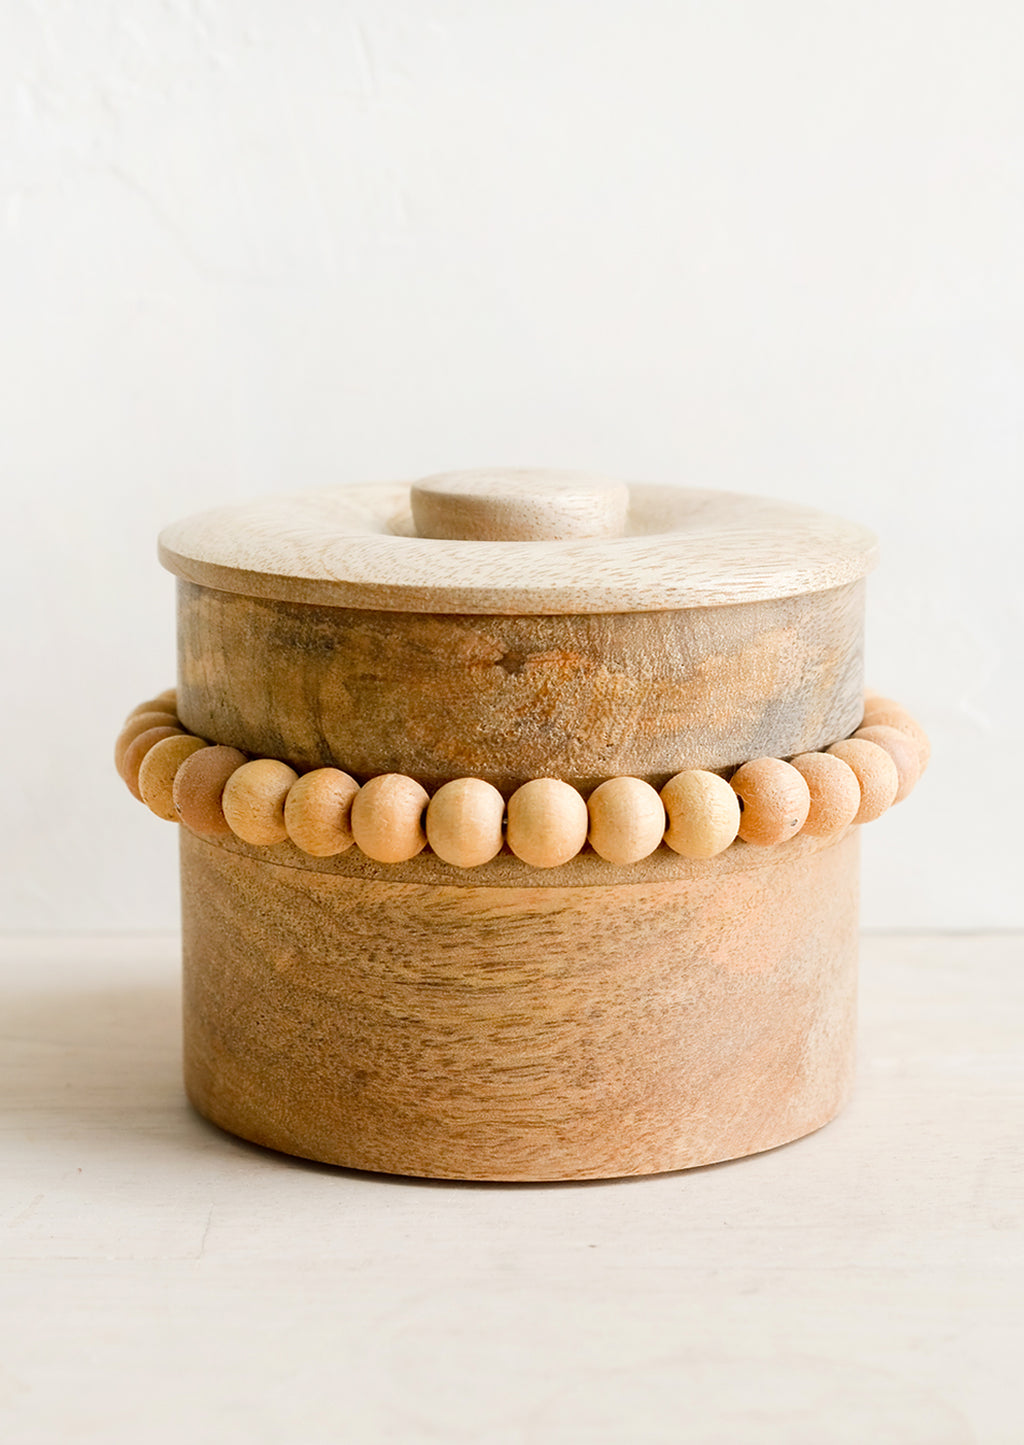 1: A round wooden storage box with lid and wooden beaded detailing.